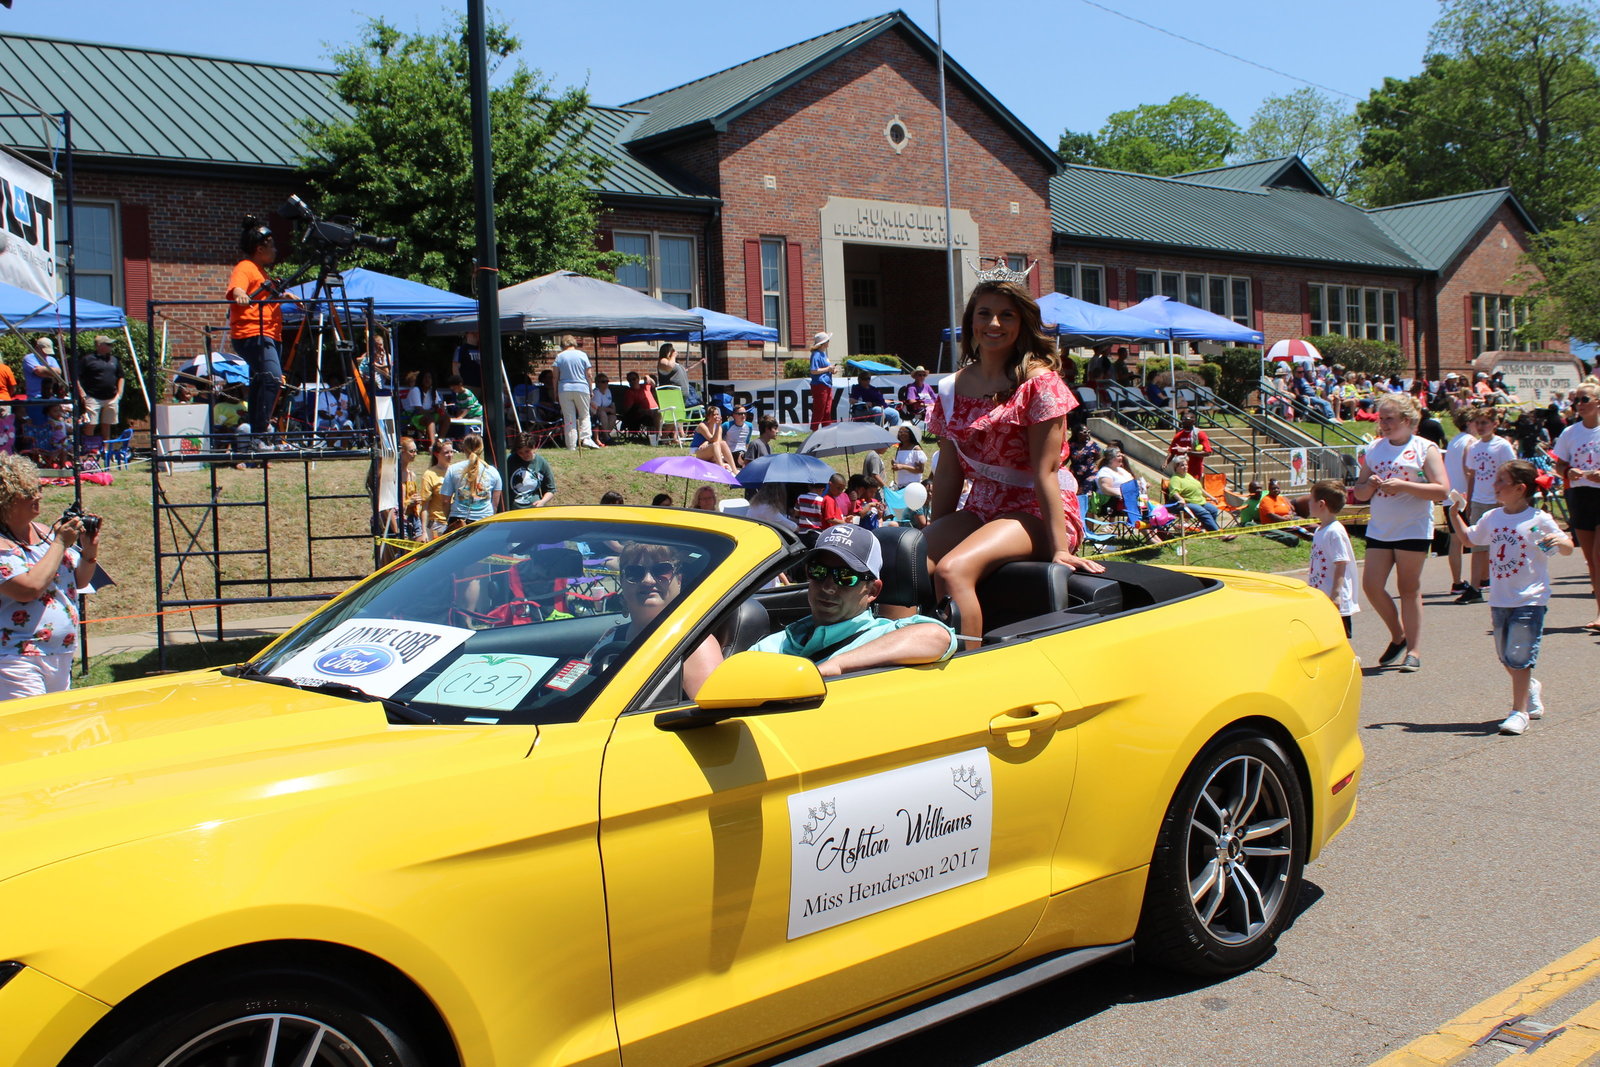 West Tennessee Strawberry Festival - Humboldt TN - Girls Parade12